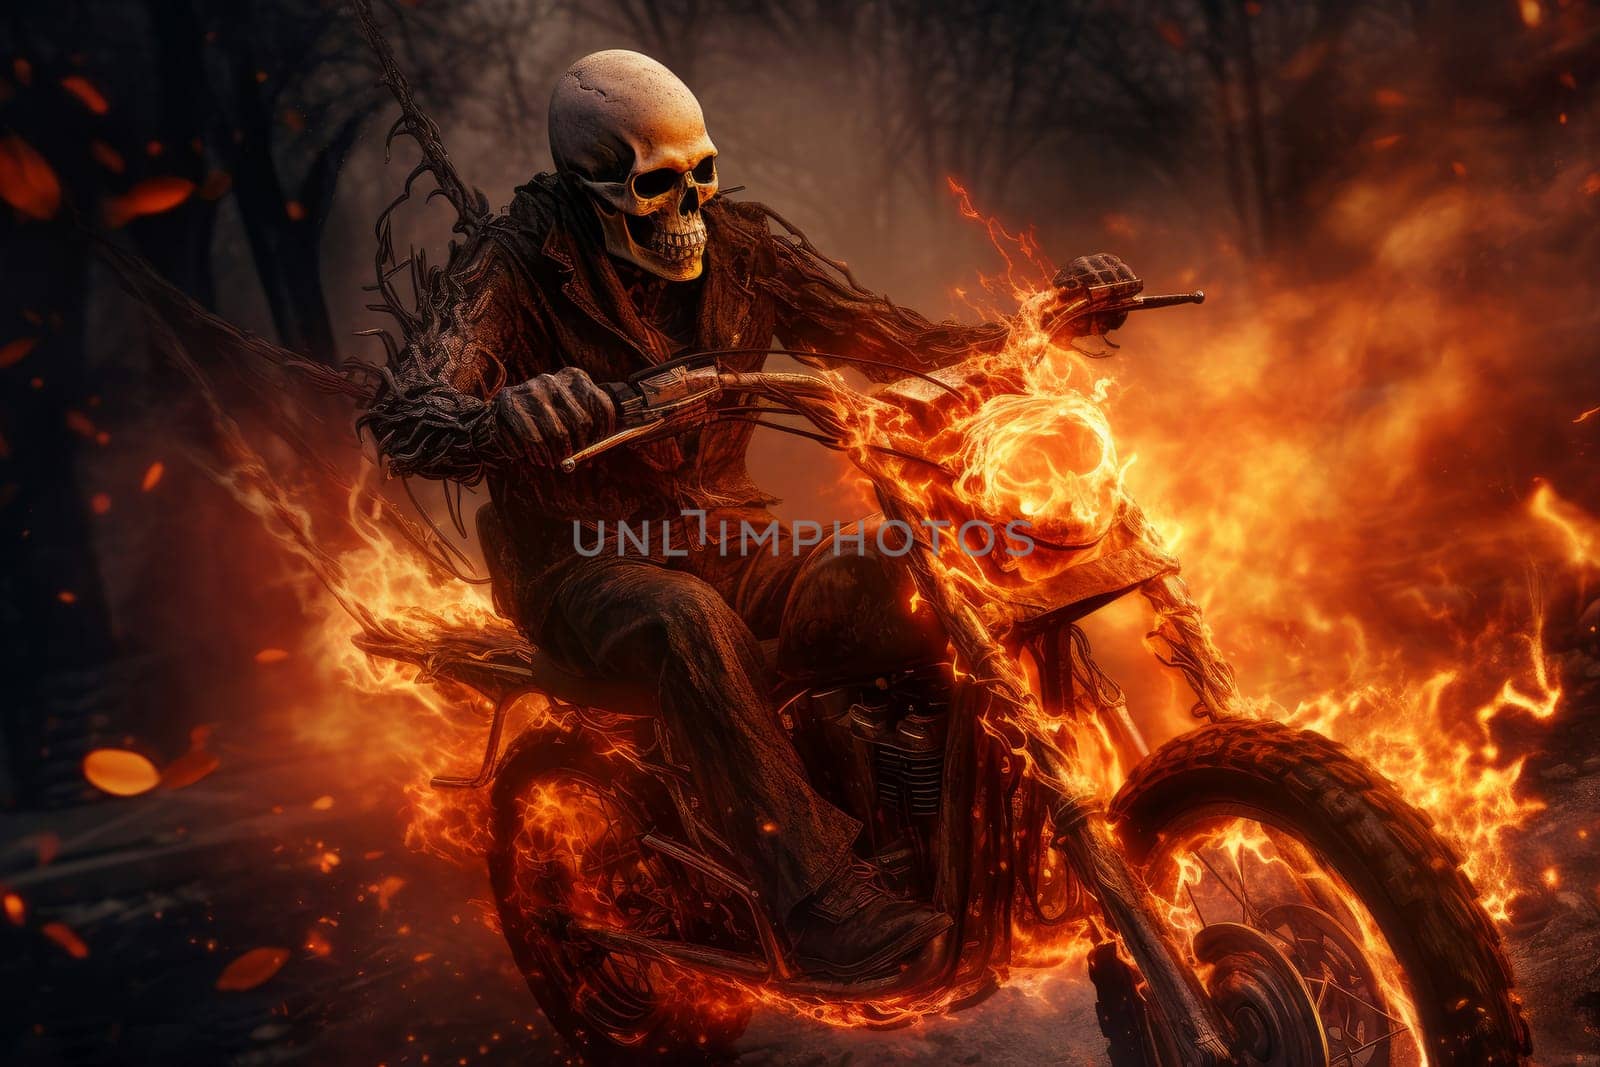 Flaming Human skeleton riding on fire motorbike. Speed race by ylivdesign